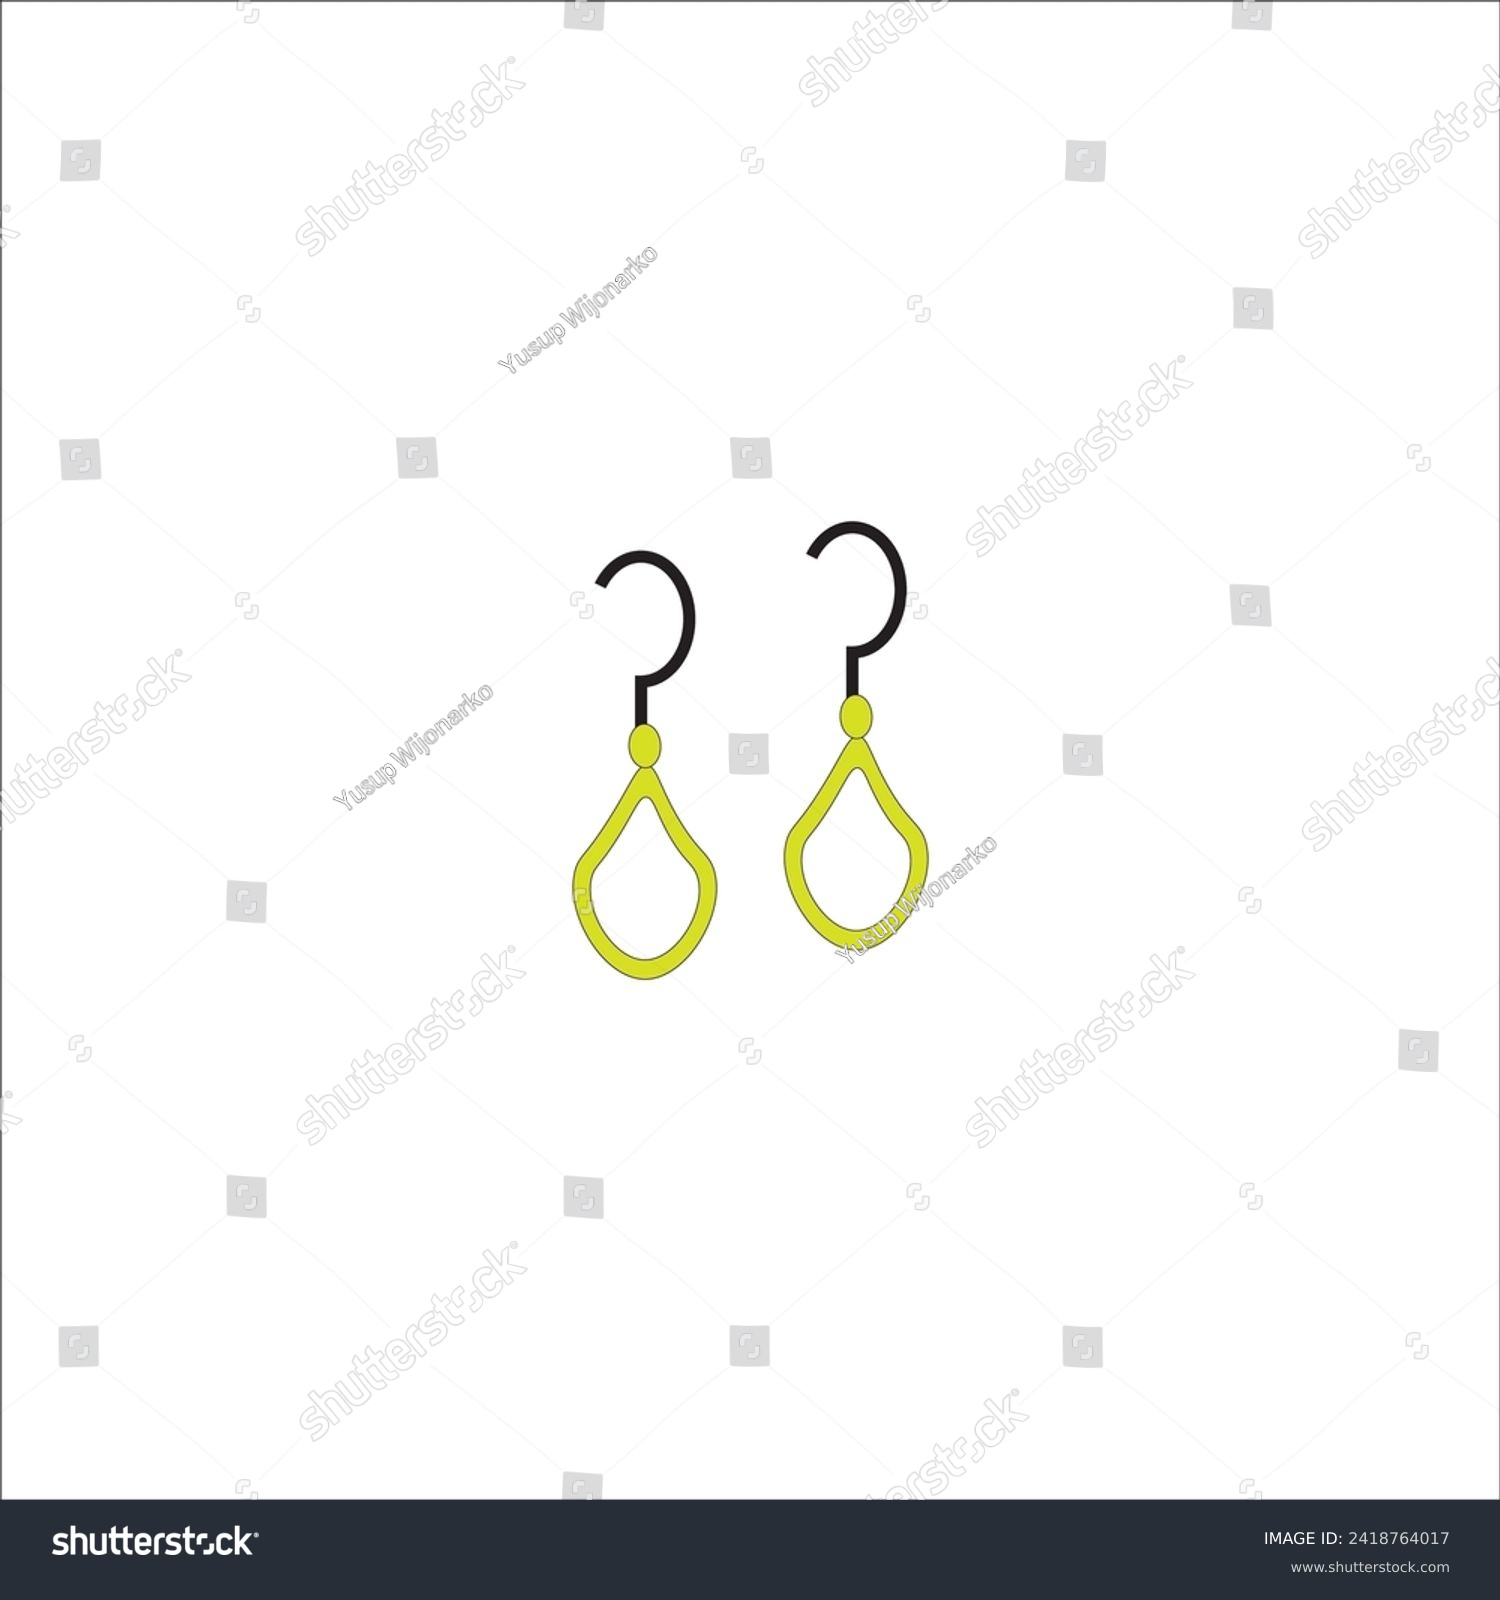 SVG of earring jewelry icon logovector design svg